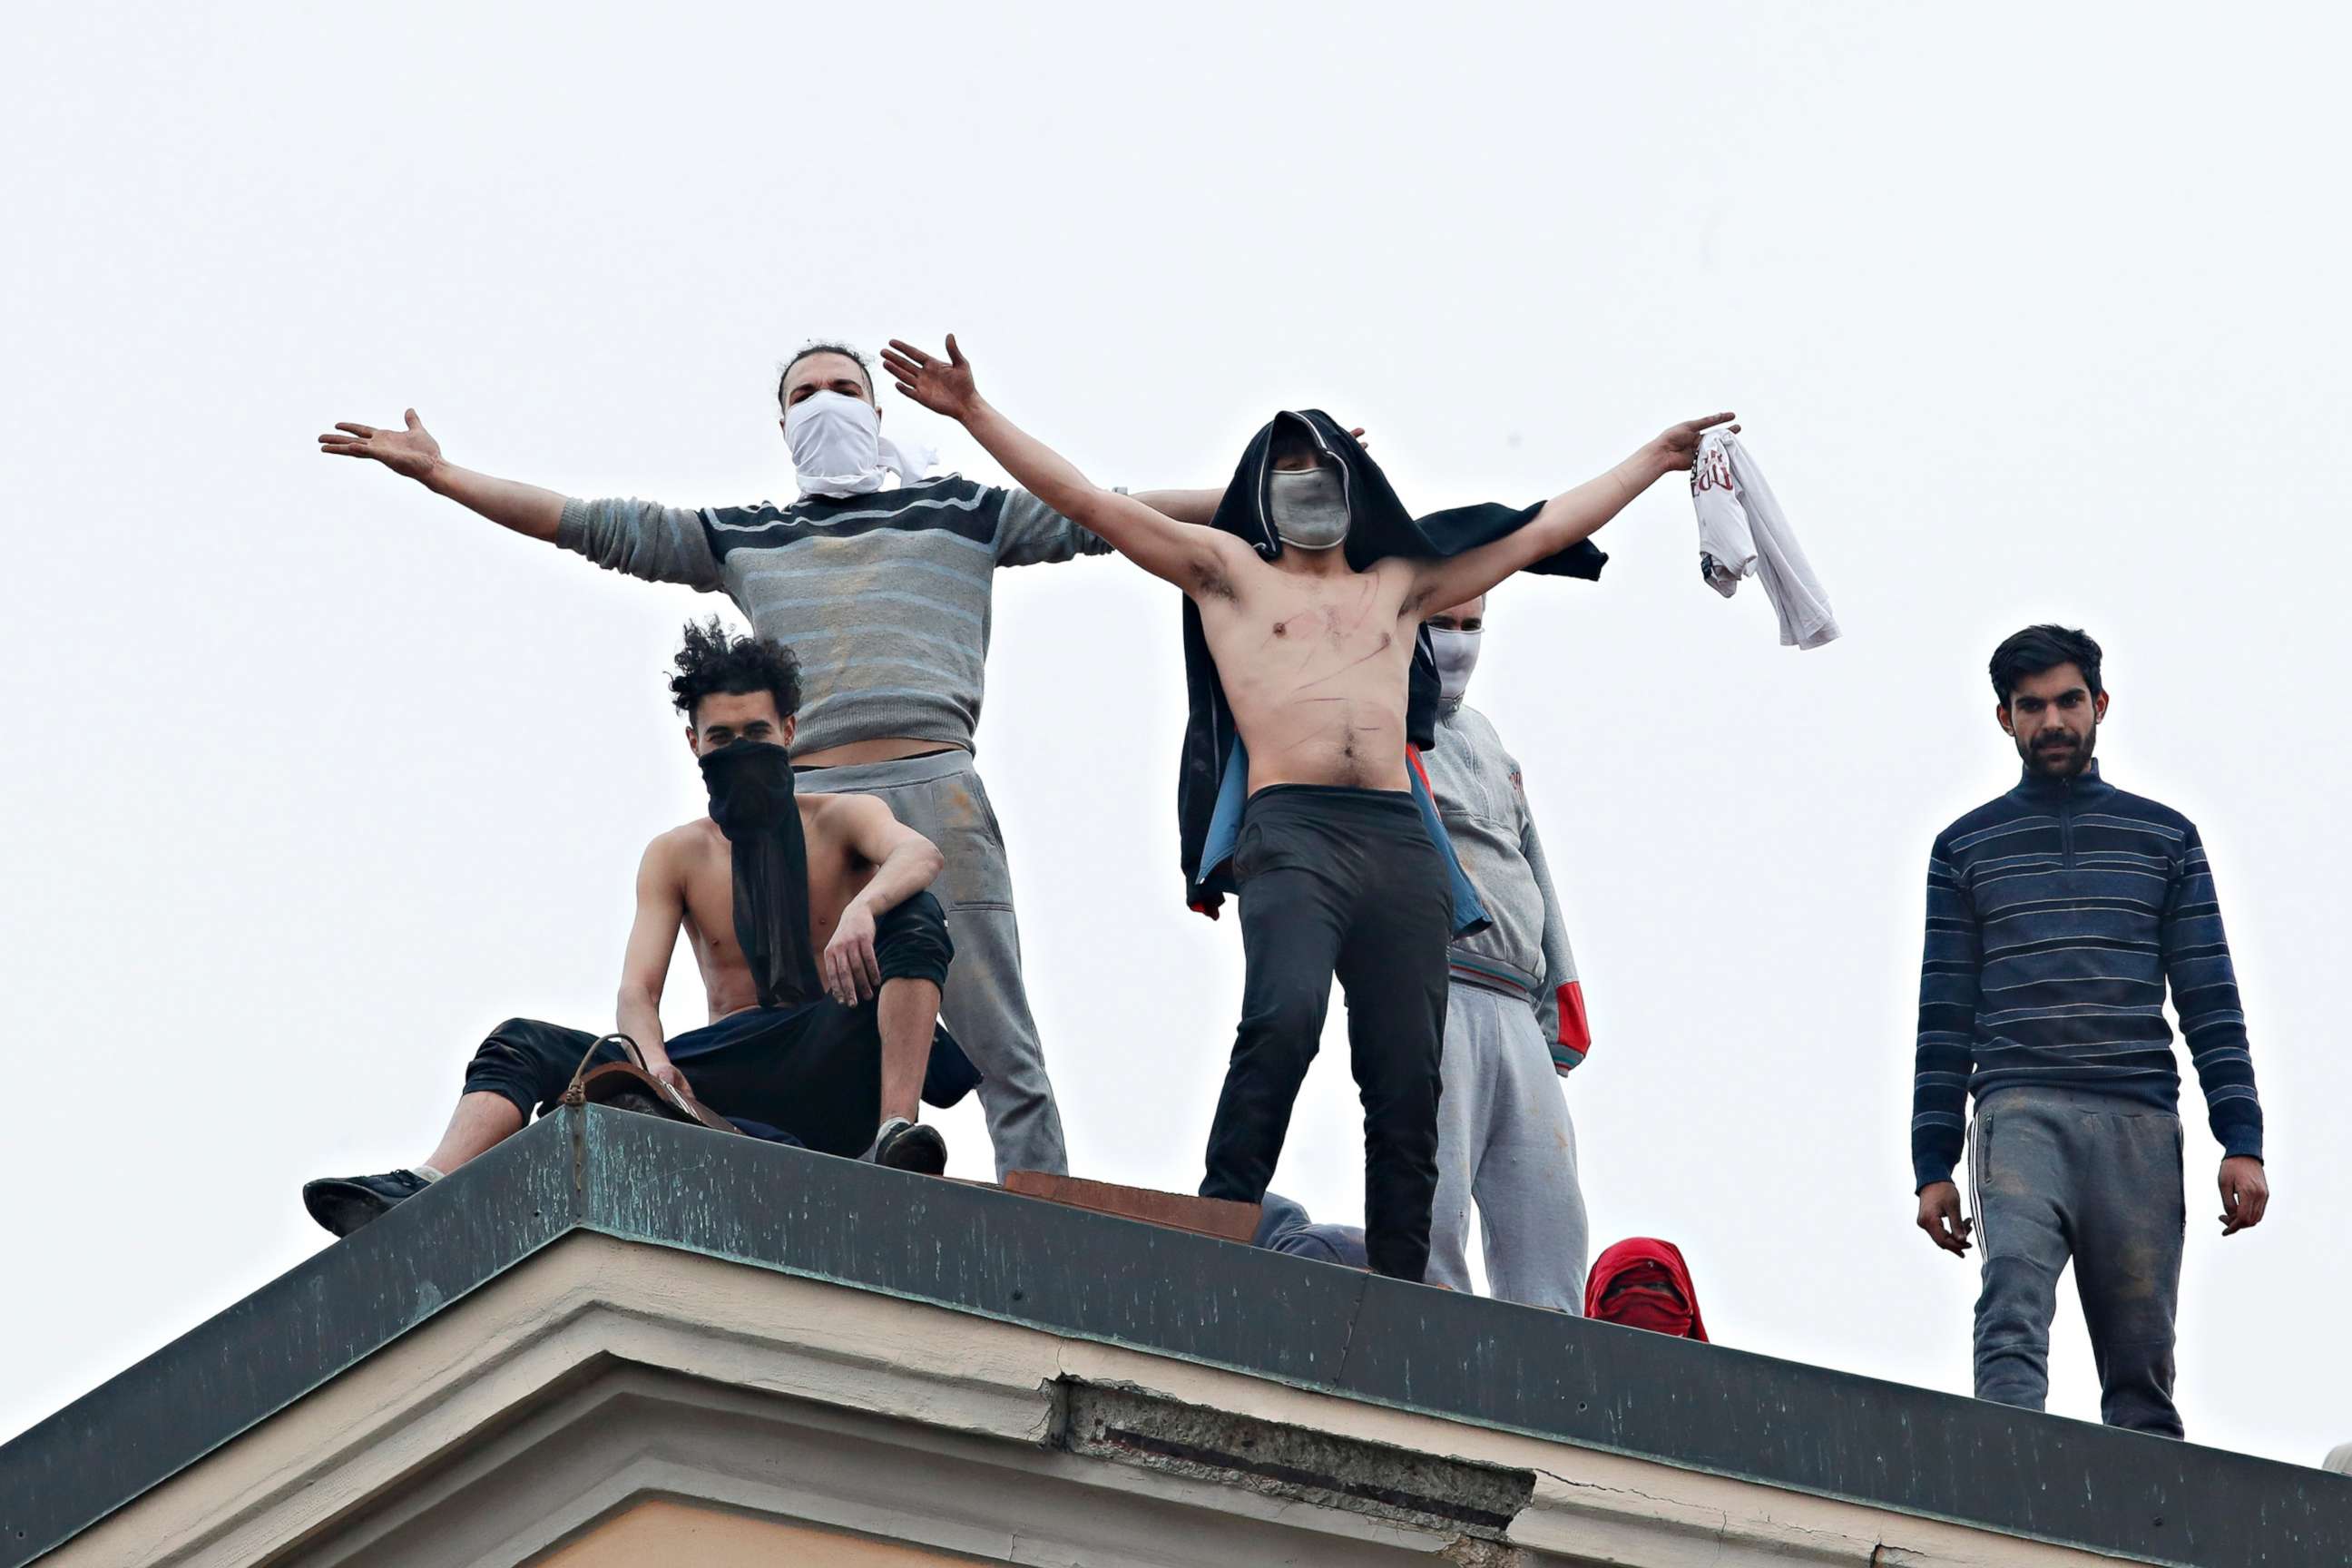 PHOTO: Inmates stand on the roof of the San Vittore prison to protest after restrictions that were imposed on family visits to prevent coronavirus transmissions, in Milan, Italy, March 9, 2020.